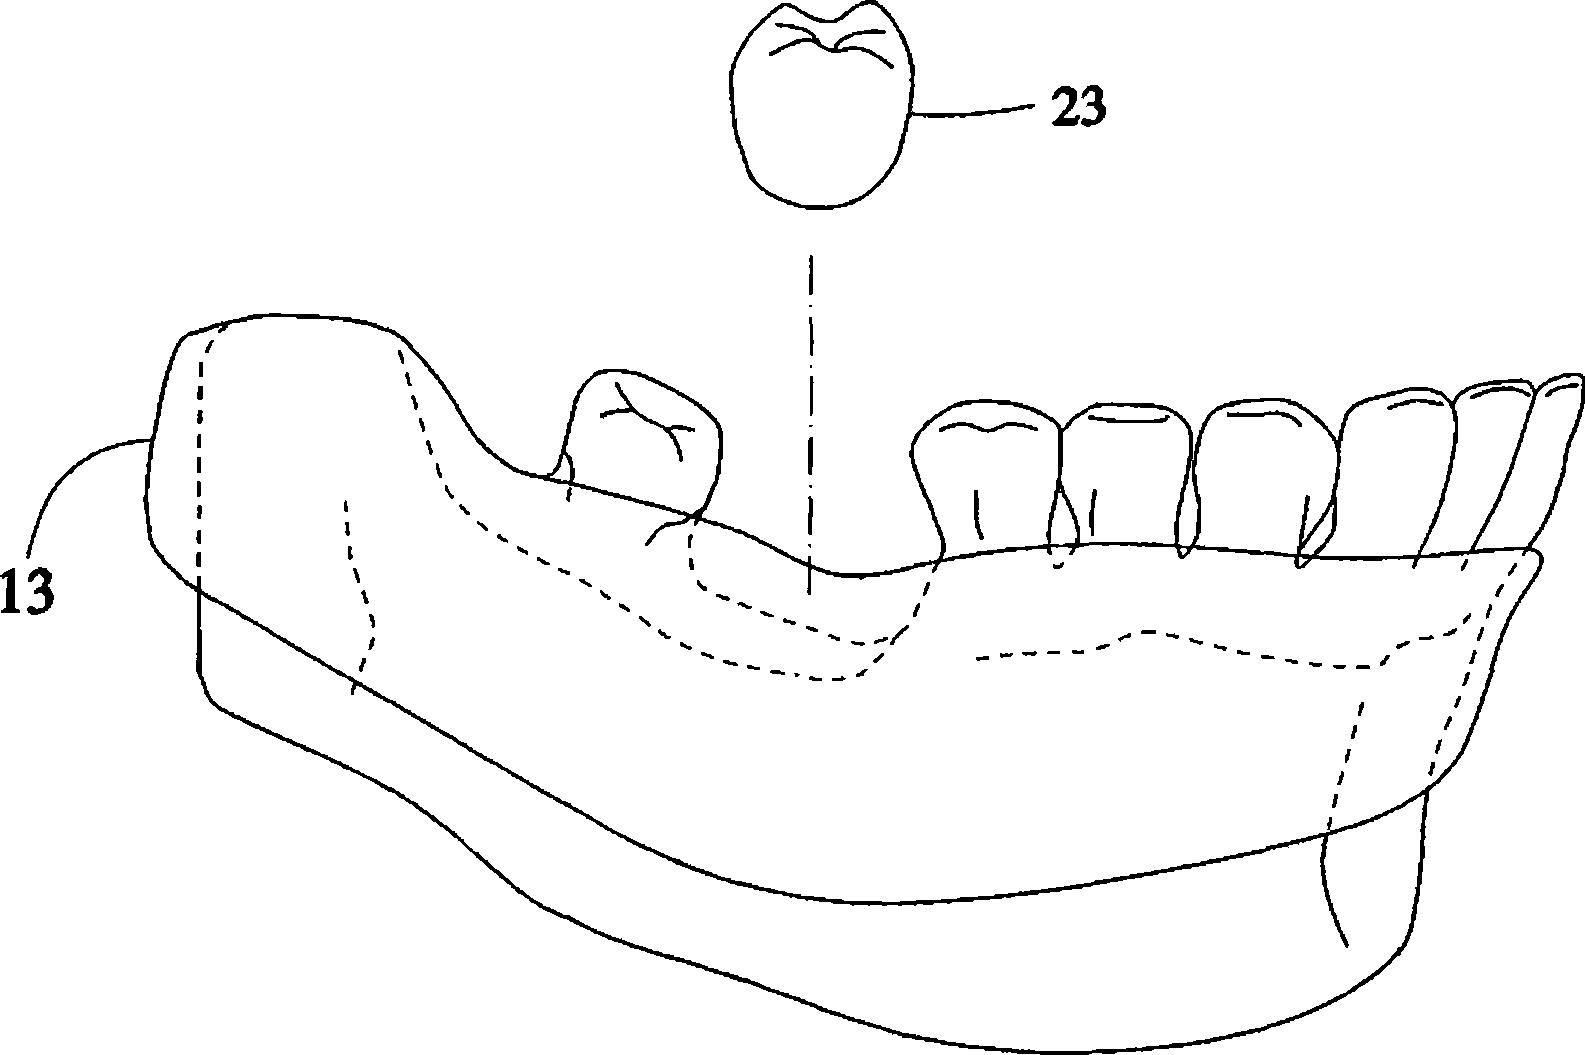 Digital supporting tooth design method by digital tooth implantation technology